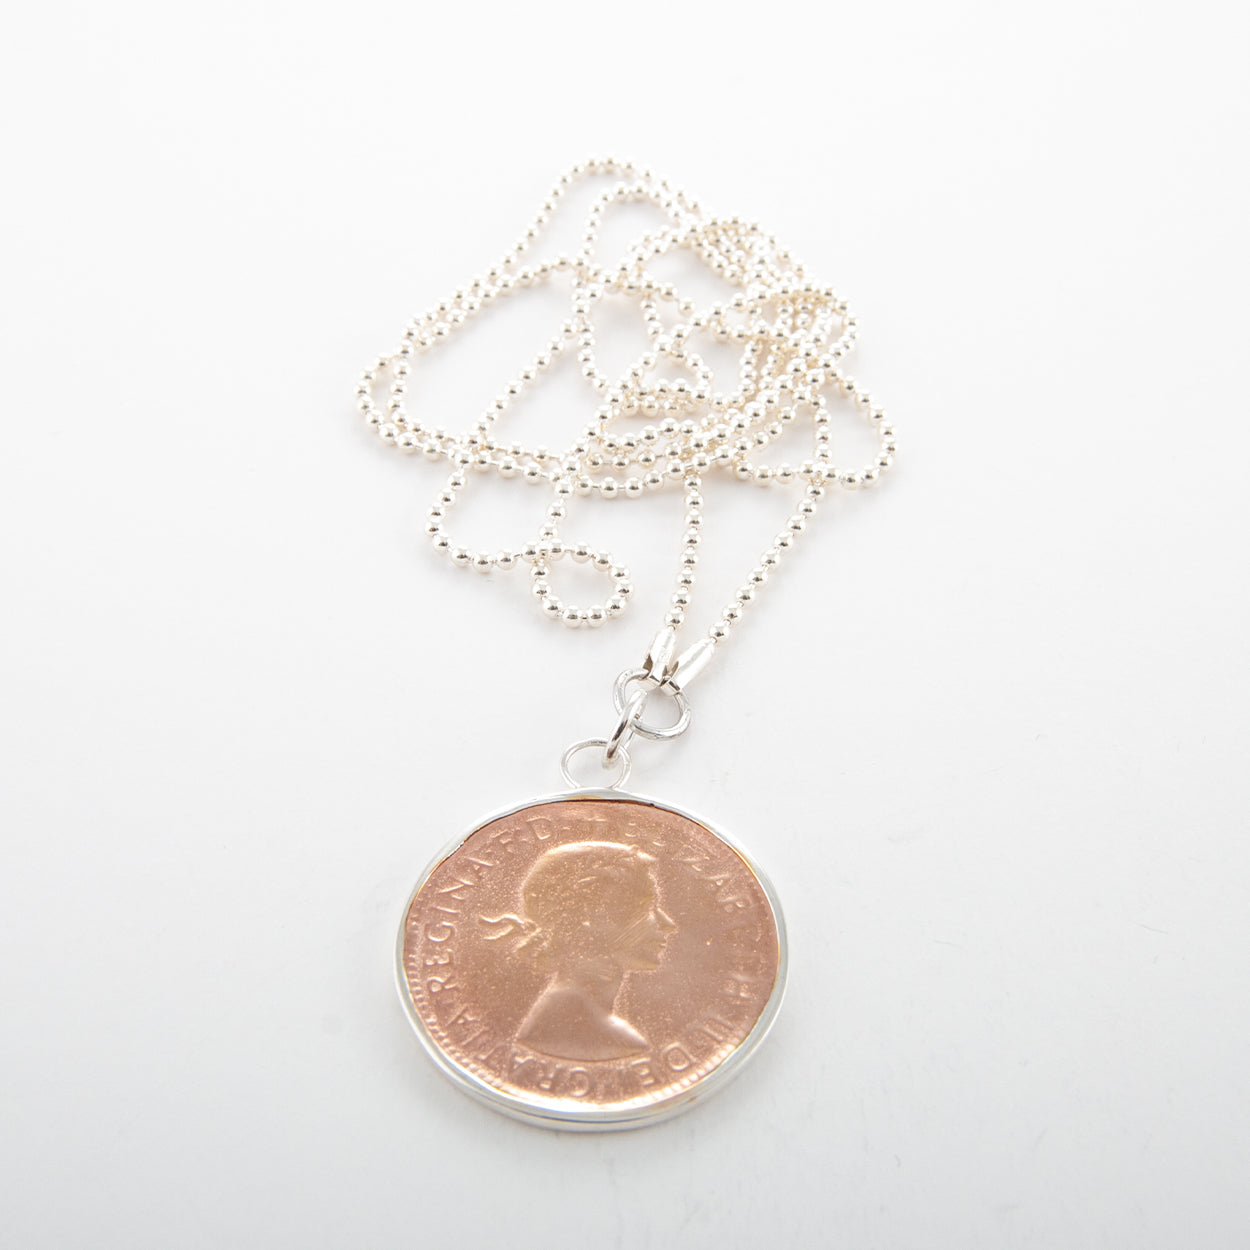 Long Sterling Silver Ball Chain Necklace with Rose Gold 1950 King George Penny